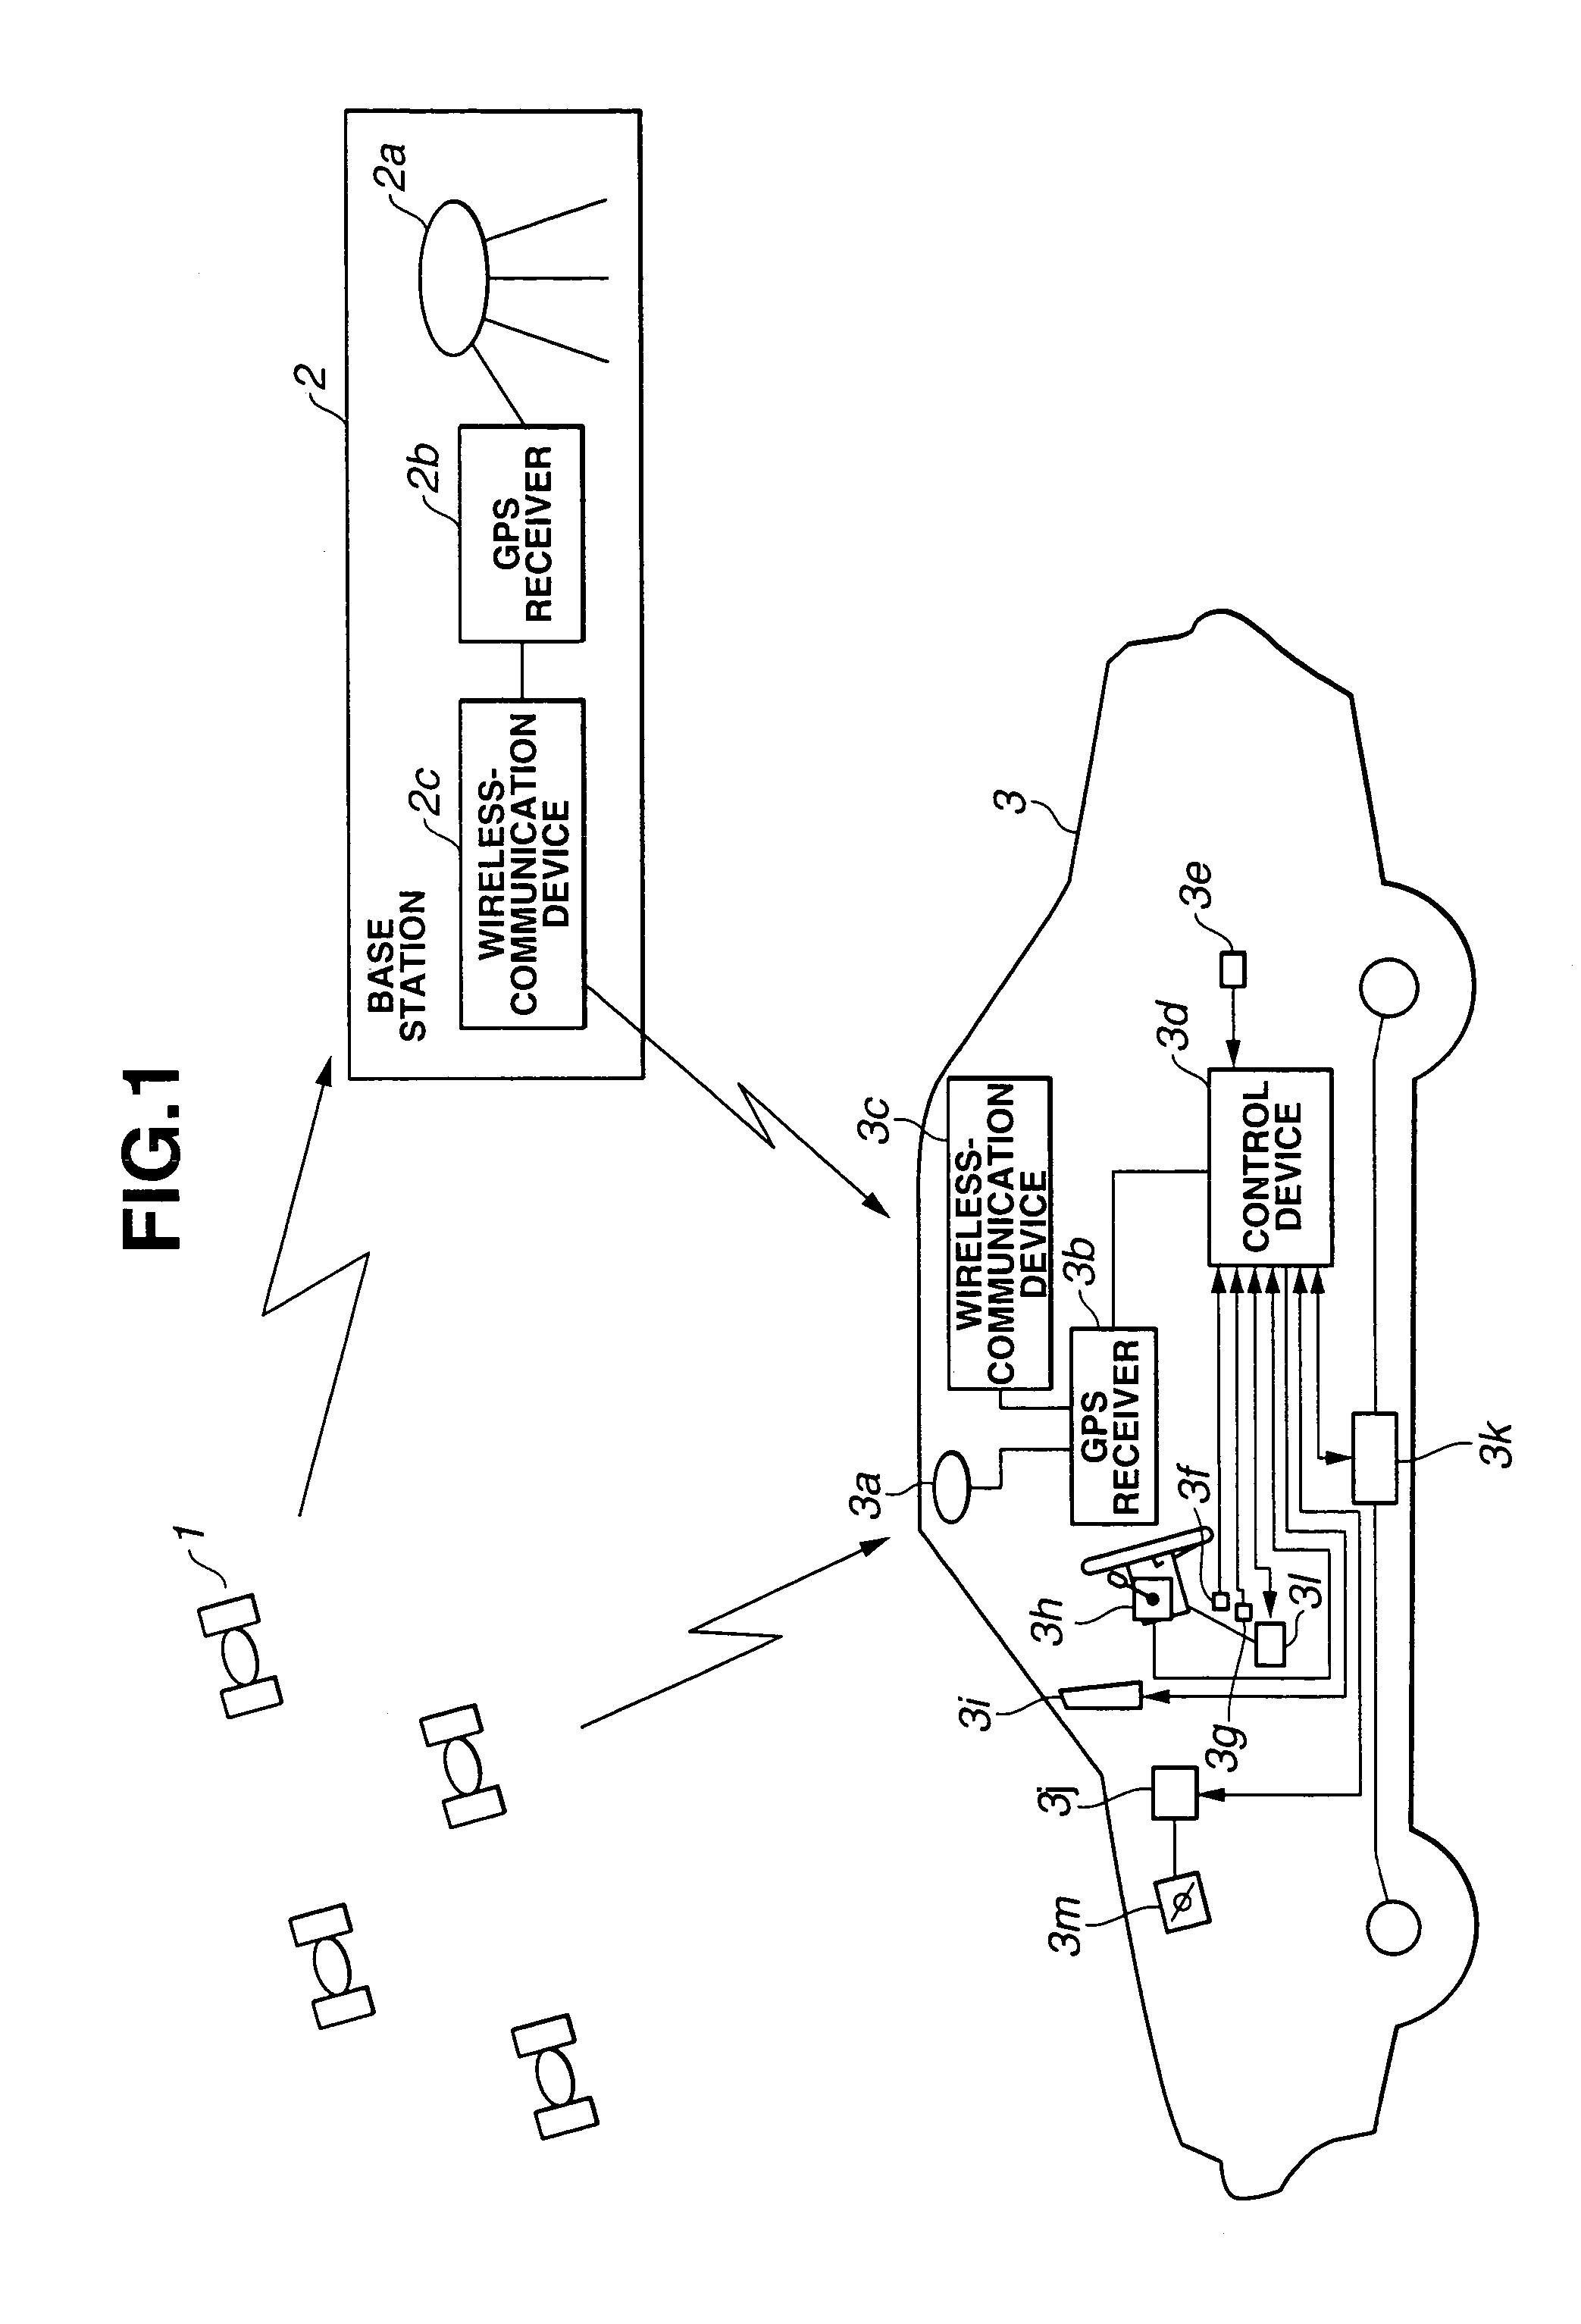 Driving control device for vehicle